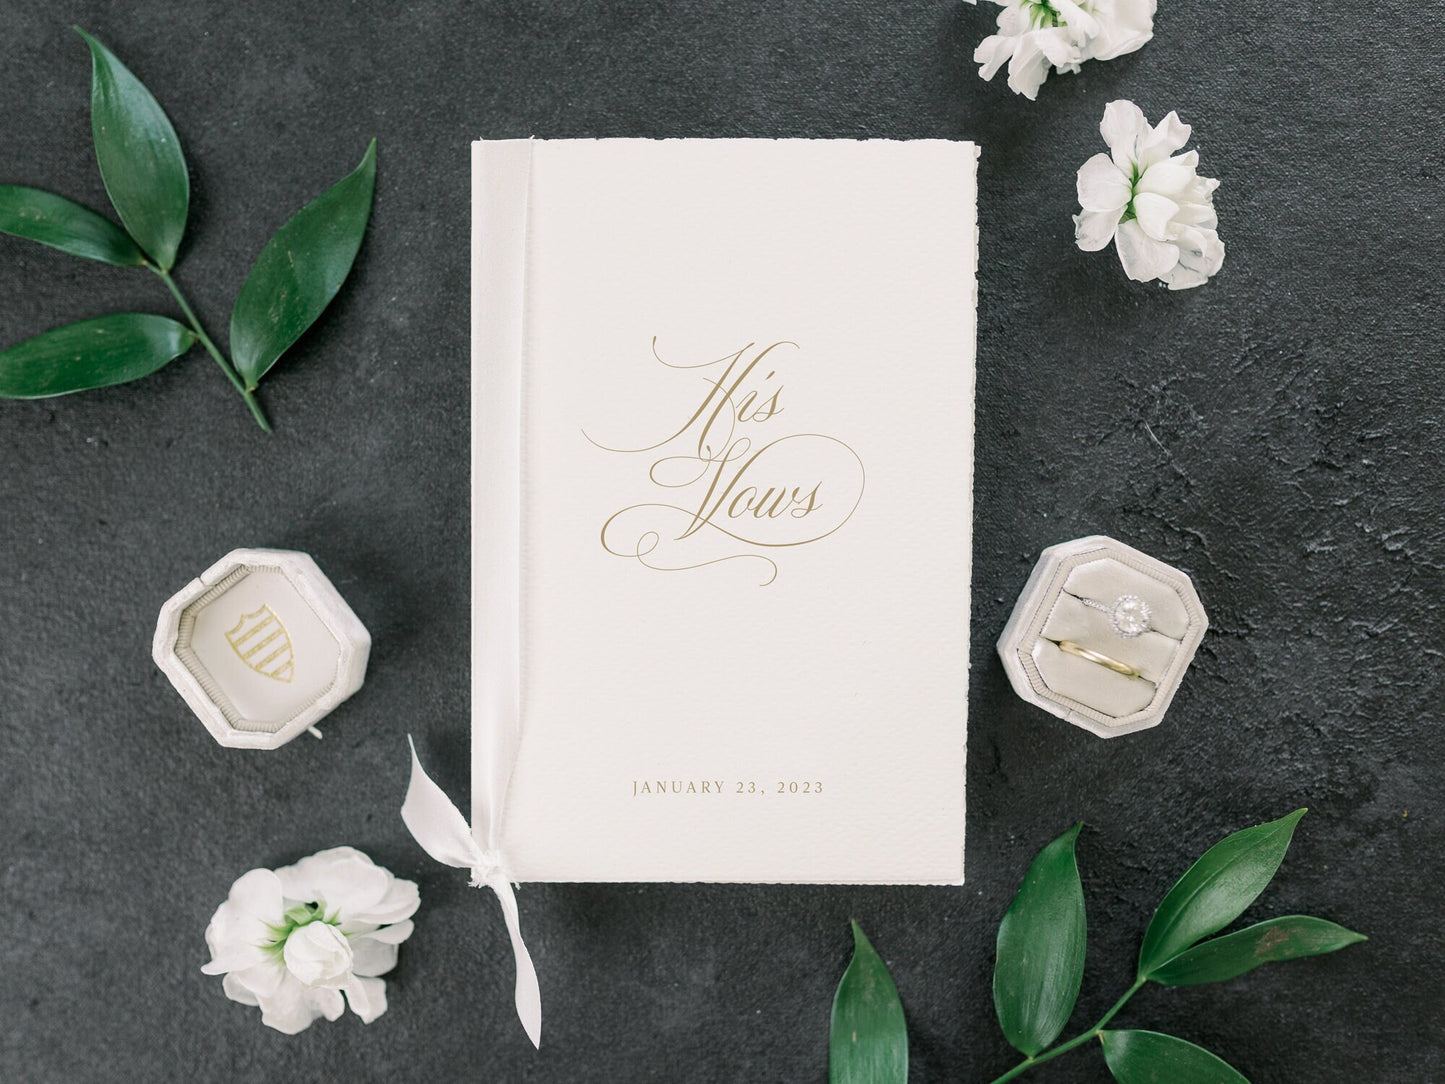 His Vows Grooms Vow Book